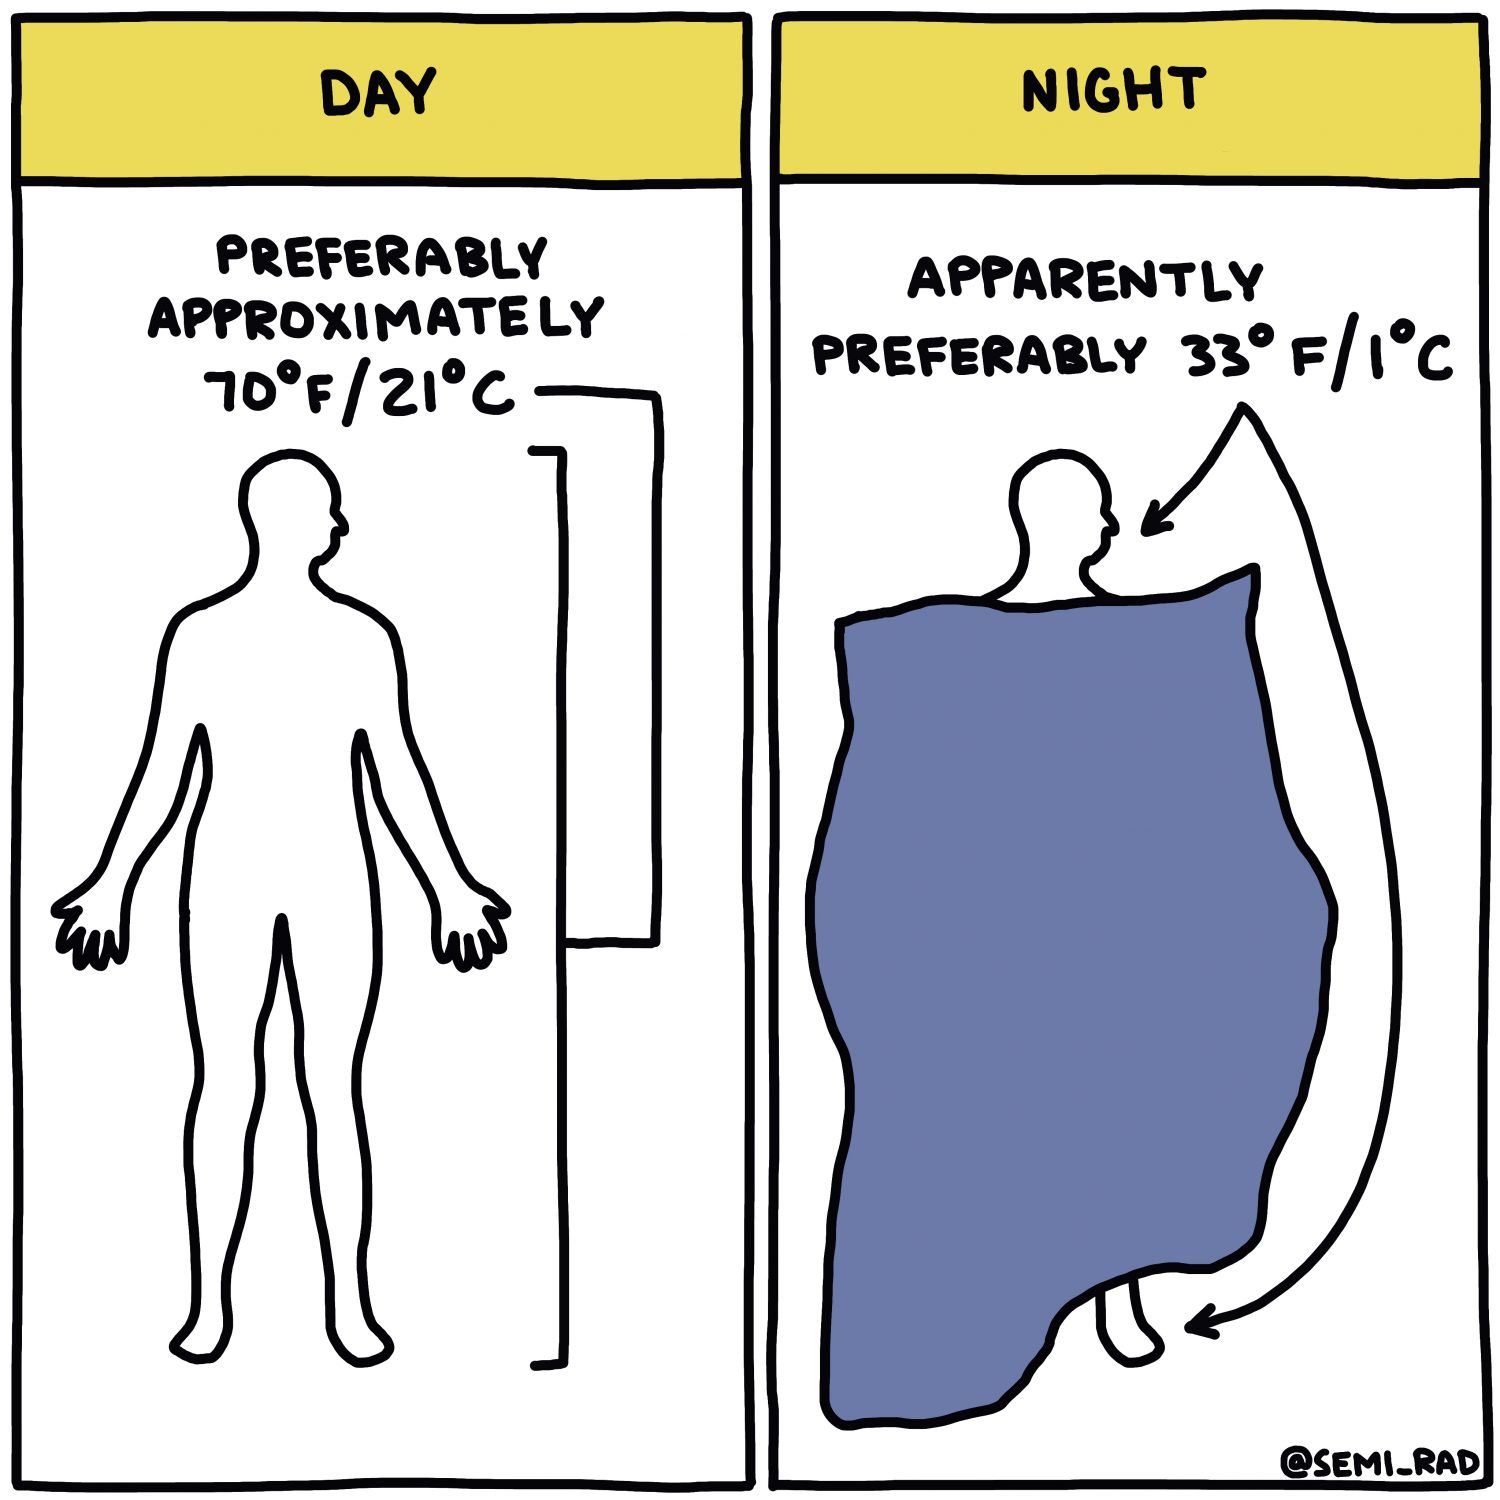 Preferable Temperatures For Humans, Day Vs. Night